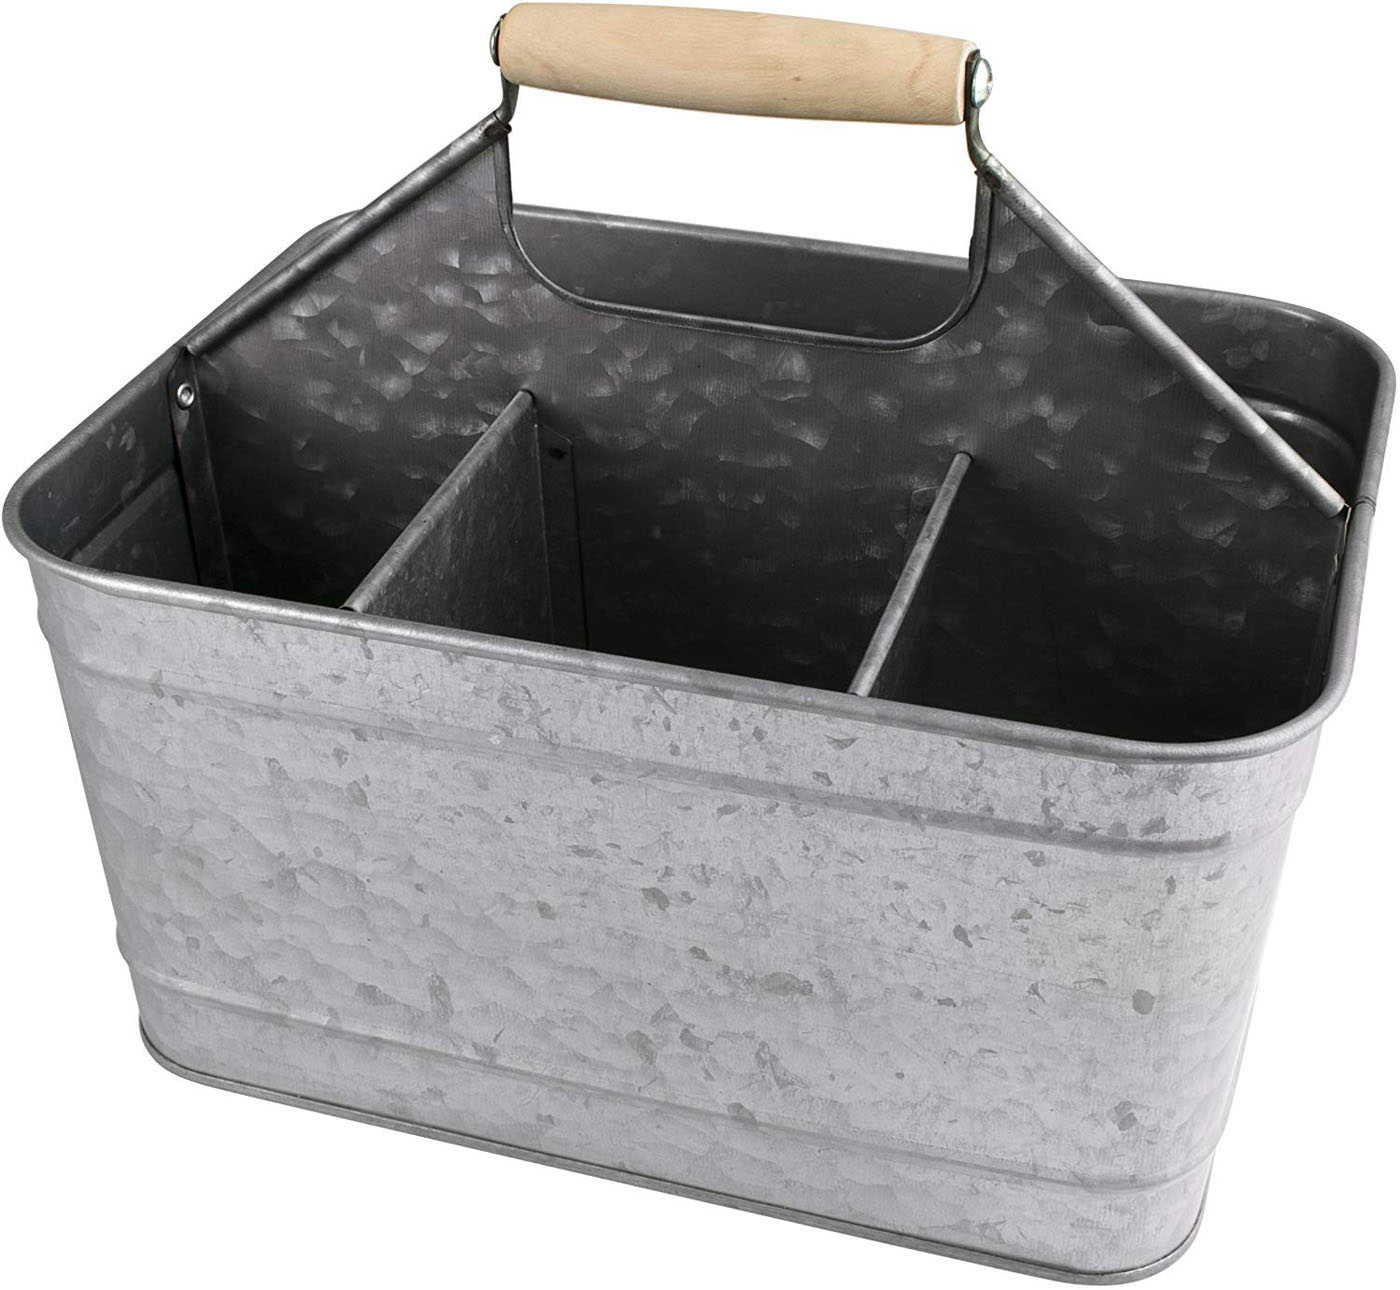 Galvanized metal caddy with wooden handle and six compartments, perfect for a furniture clean and repair kit.